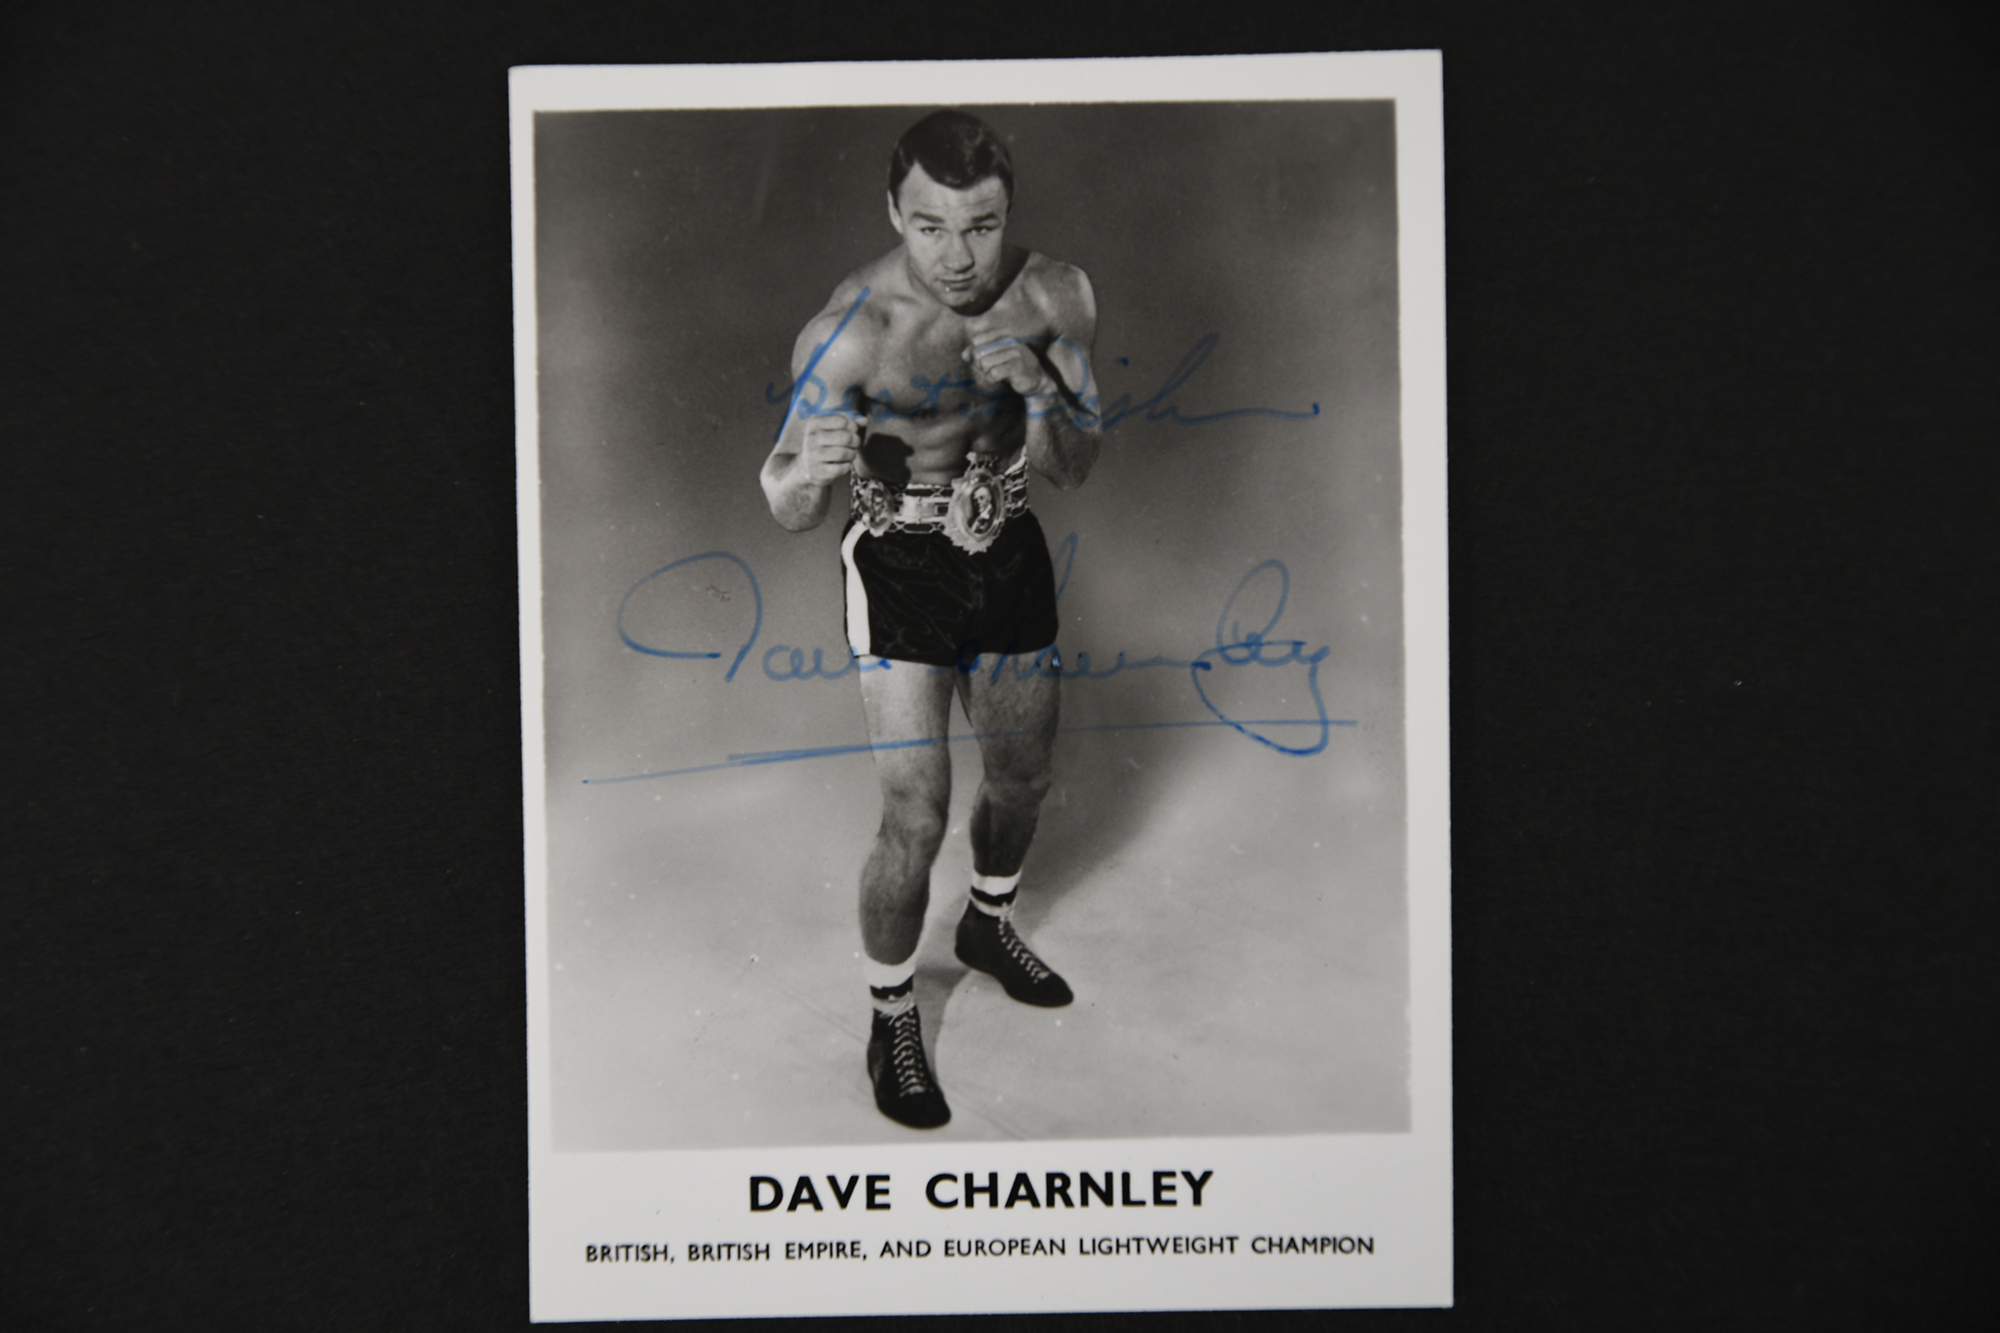 HENRY COOPER & JOE BUGNER etc. Various Boxing cards with original signatures on photo. - Image 9 of 10